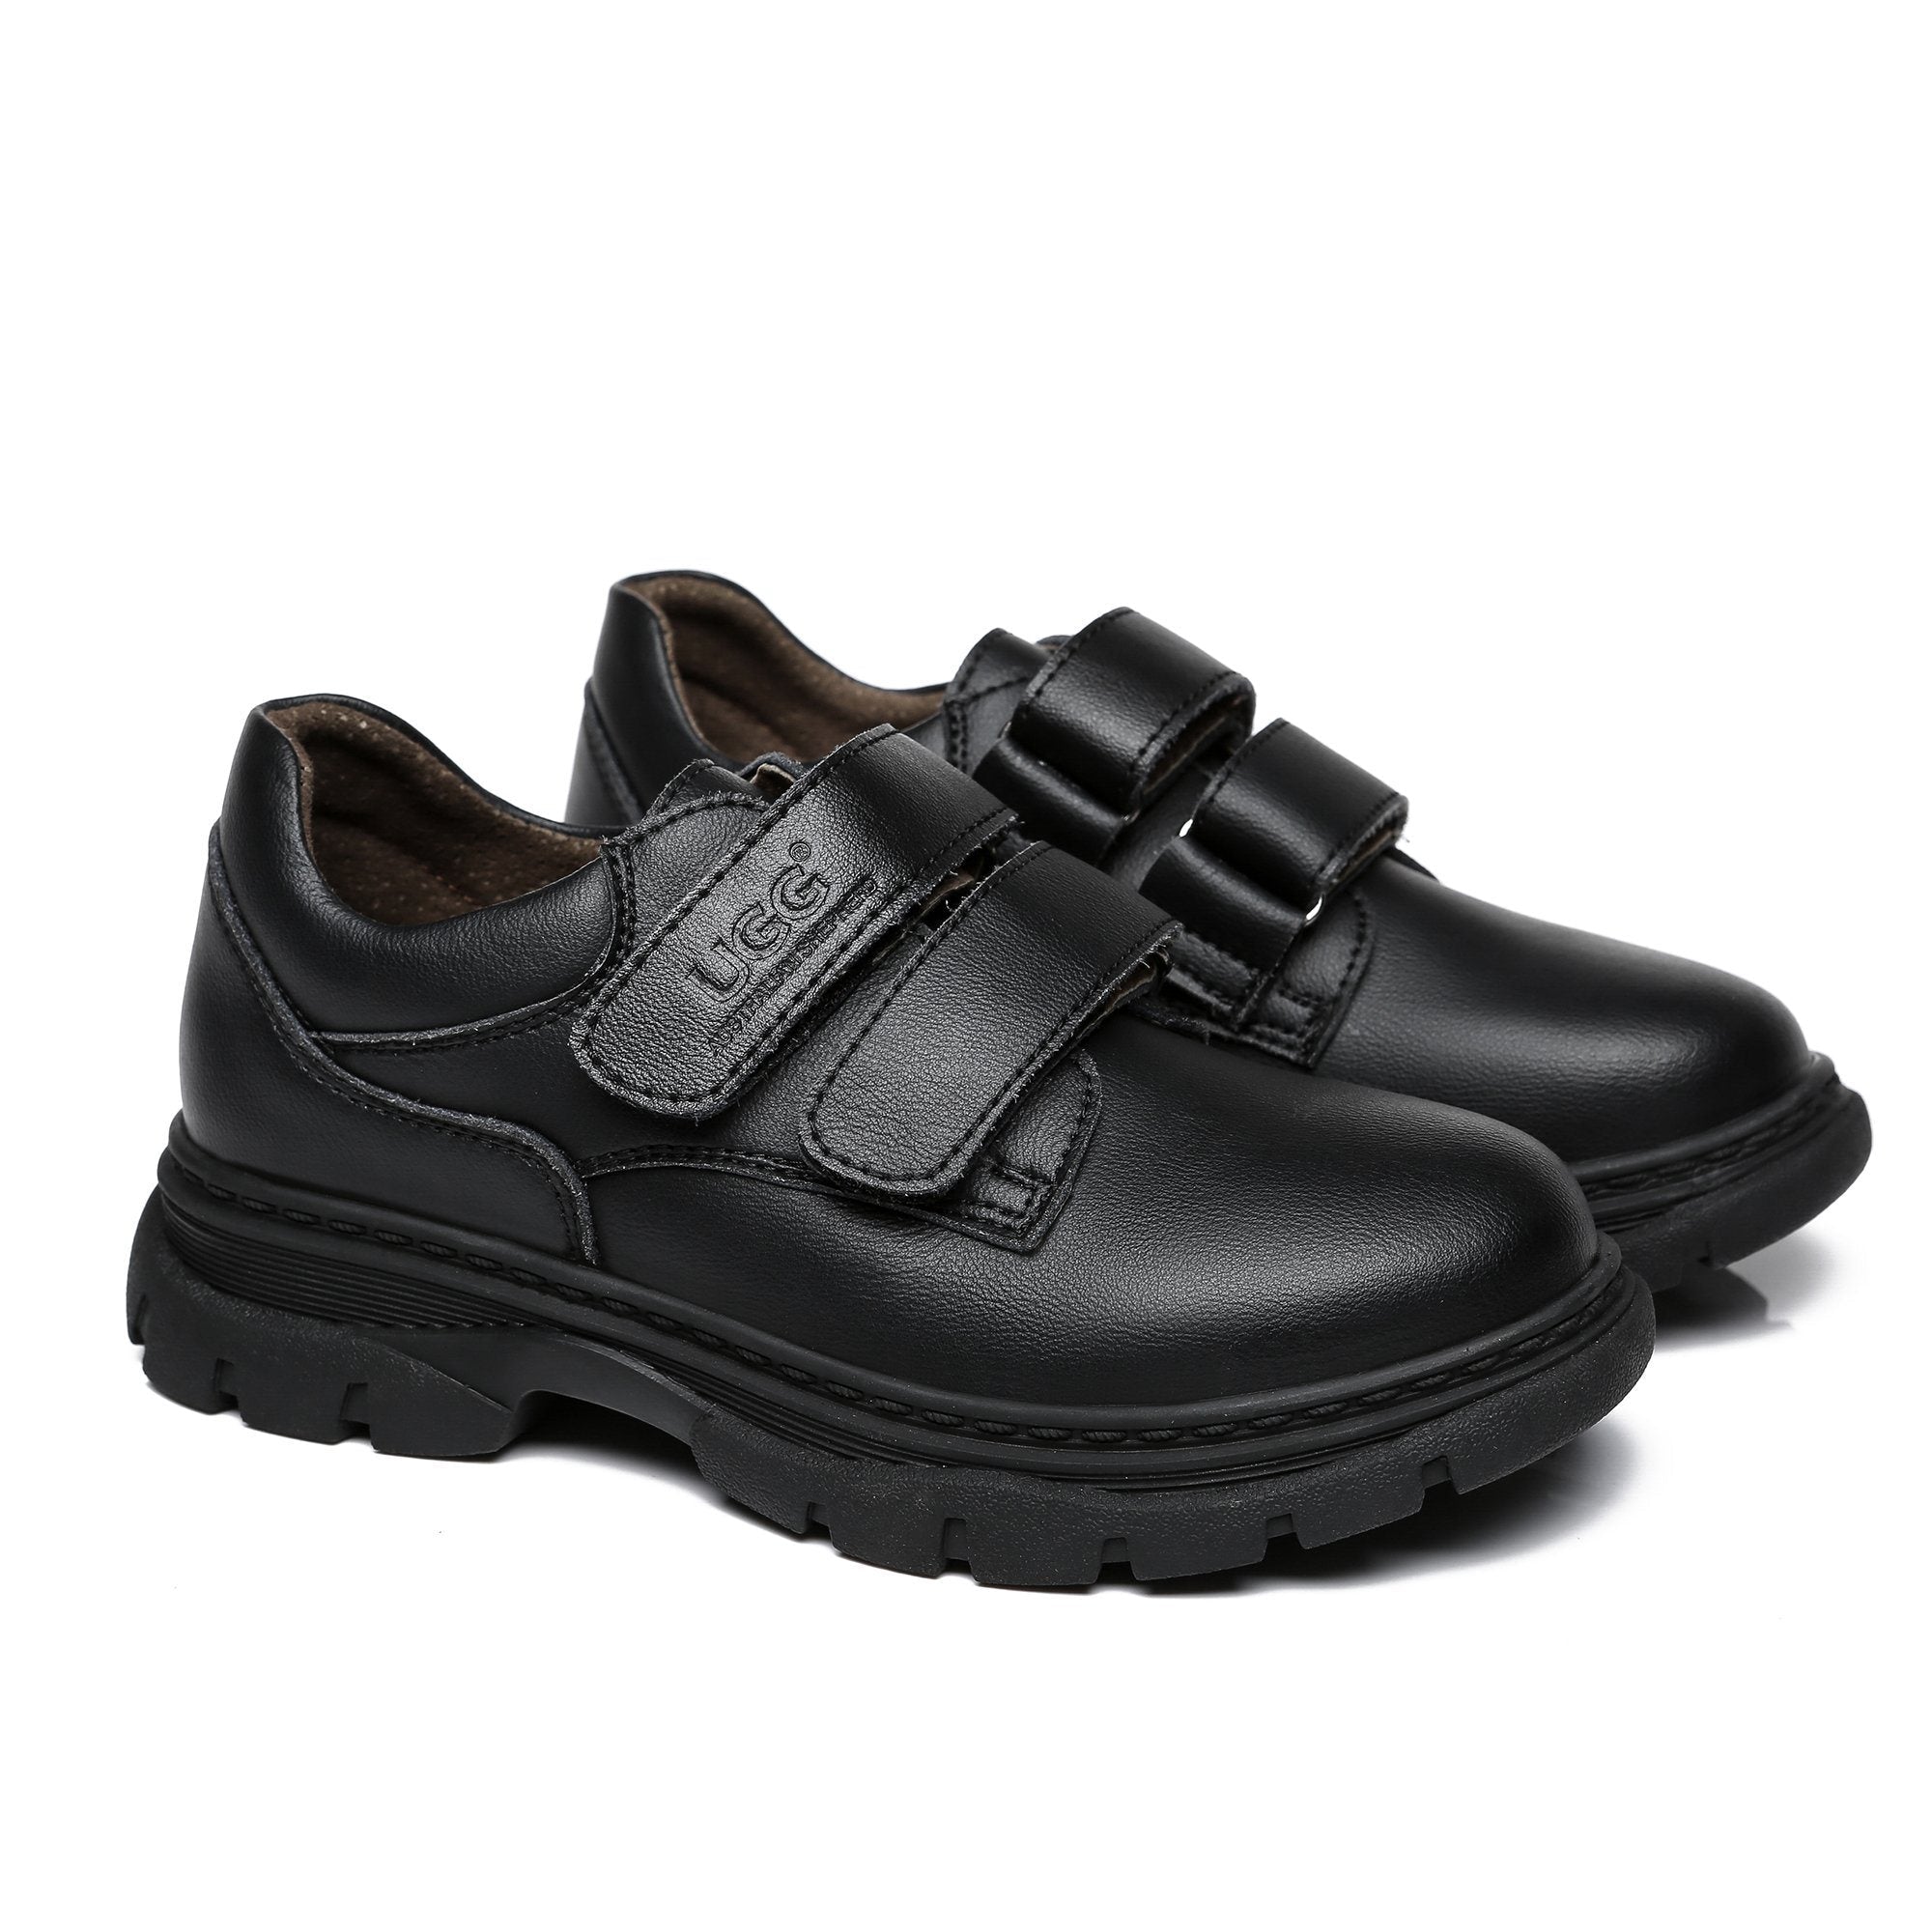 UGG Barry Leather Velcro Strap School Shoes